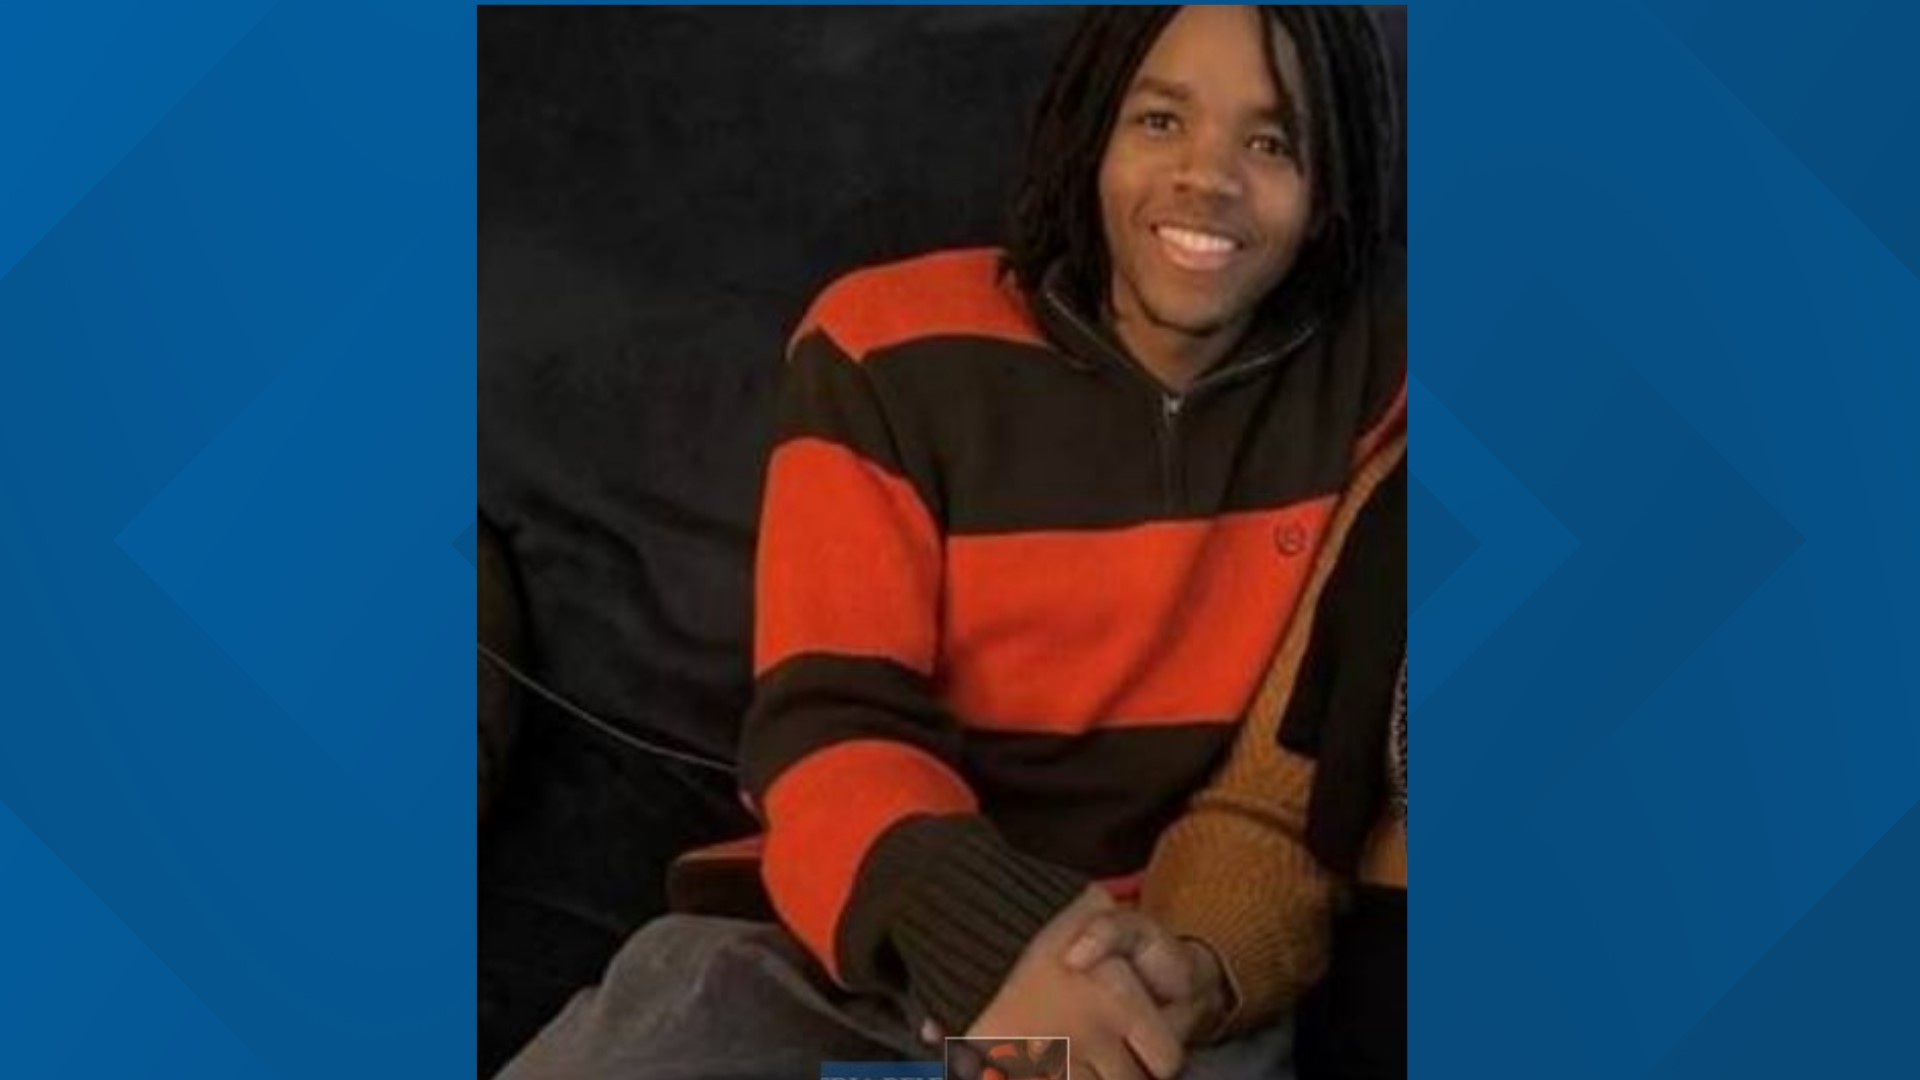 20-year-old Joseph Kamau was last seen at his home in the Gonzaga University area just after midnight on March 3, 2023.